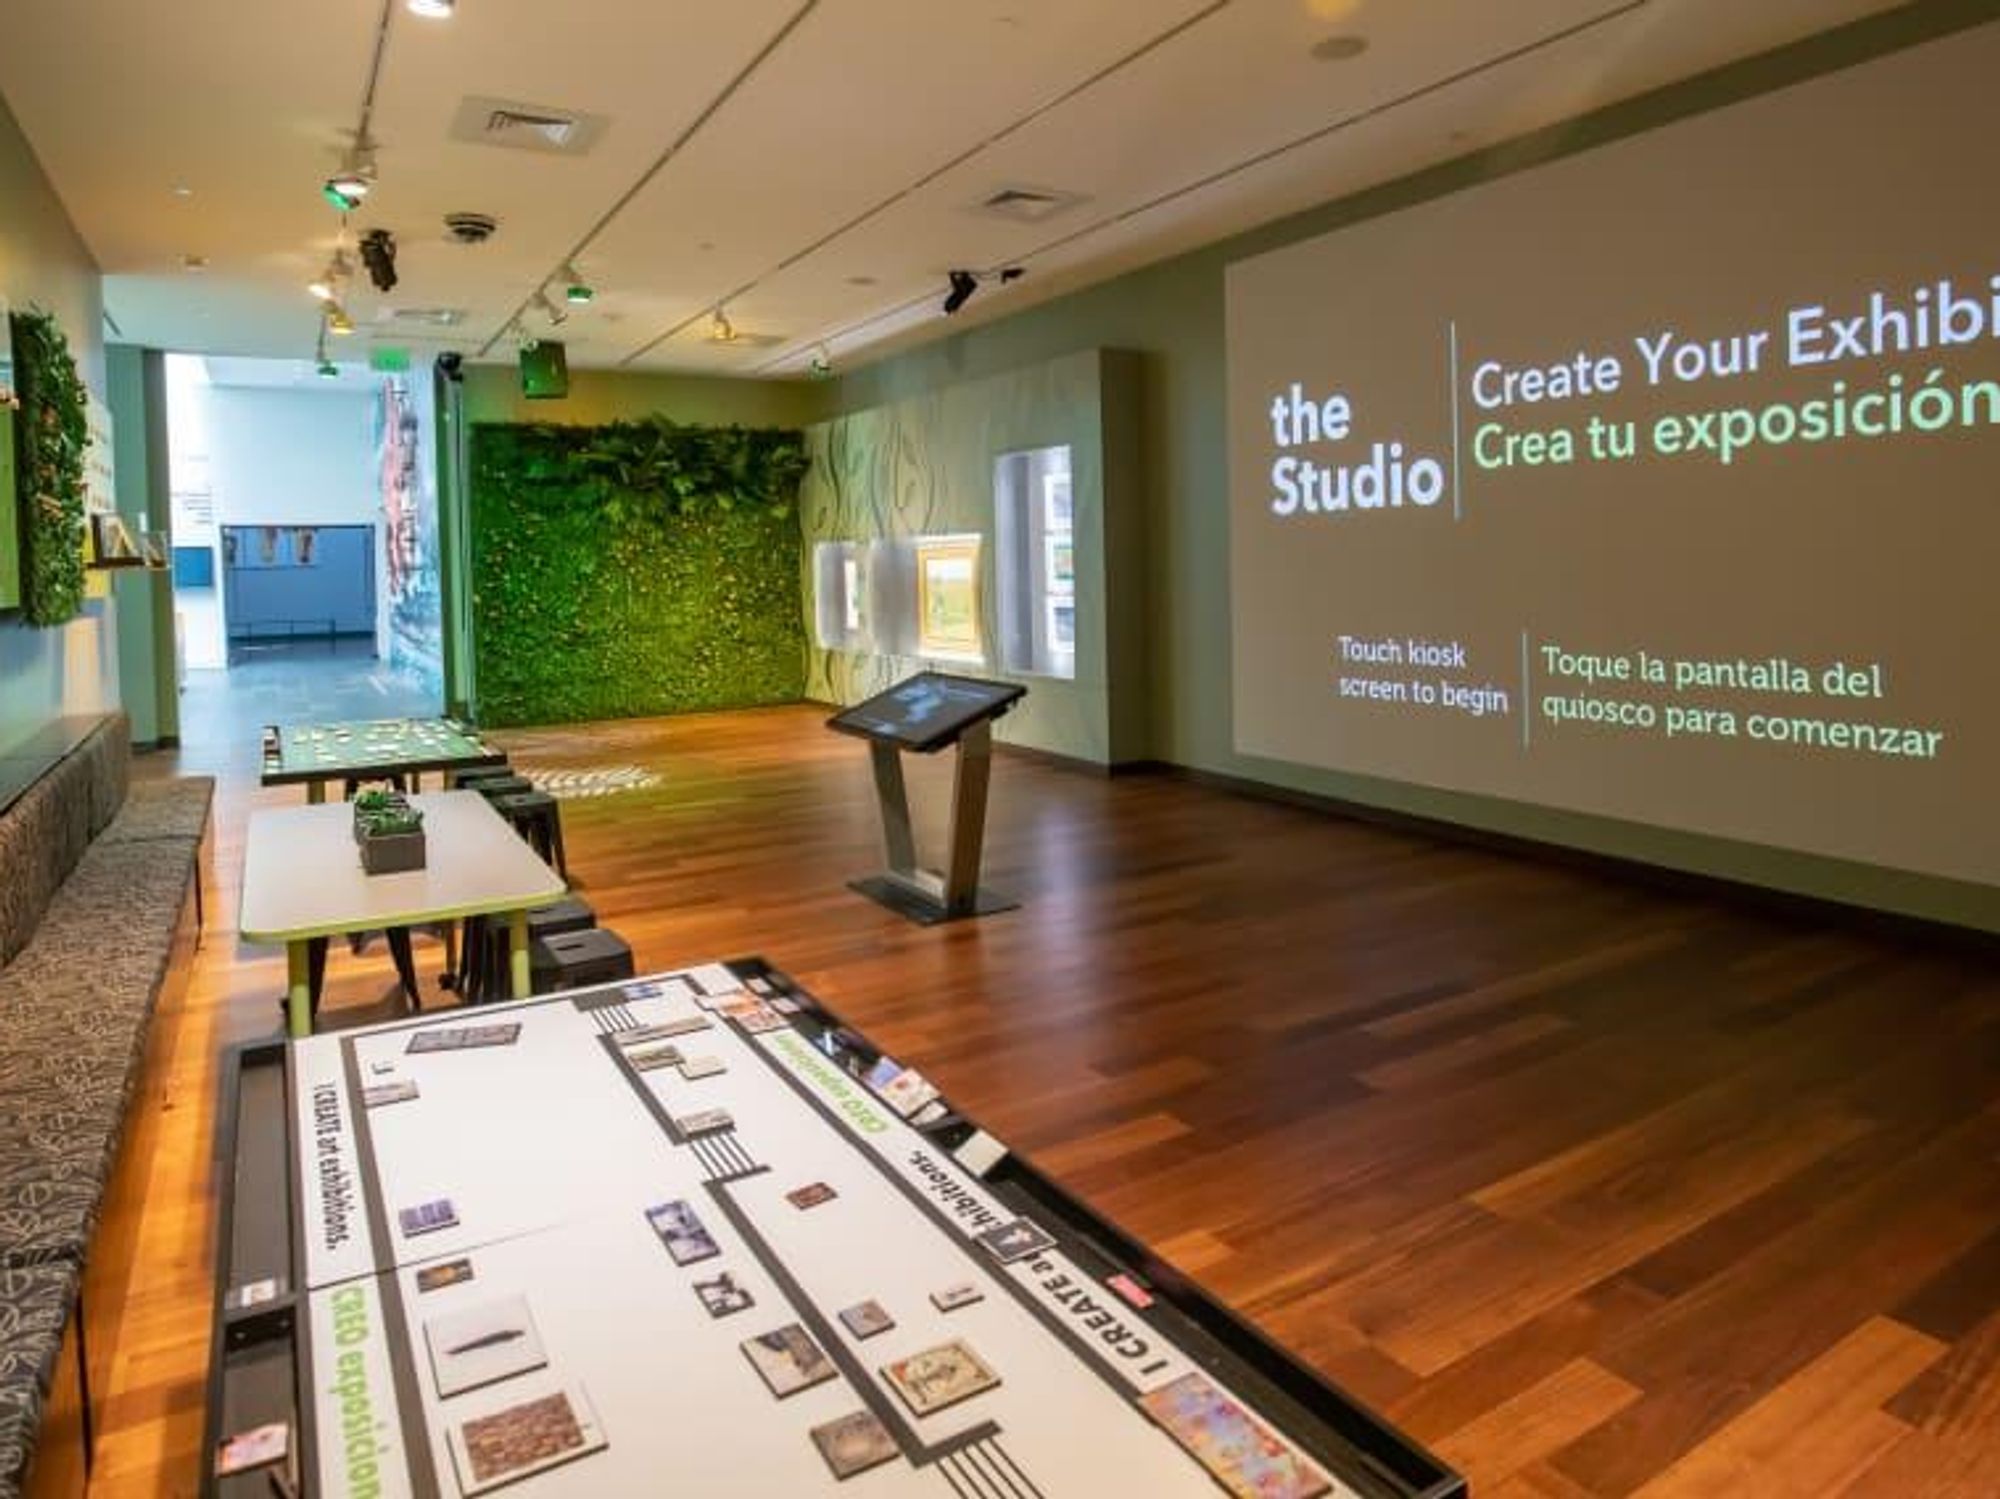 A room with multiple work stations, a projection screen, and a wall disguised as a hedge, at the McNey Art Museum's interactive studio.